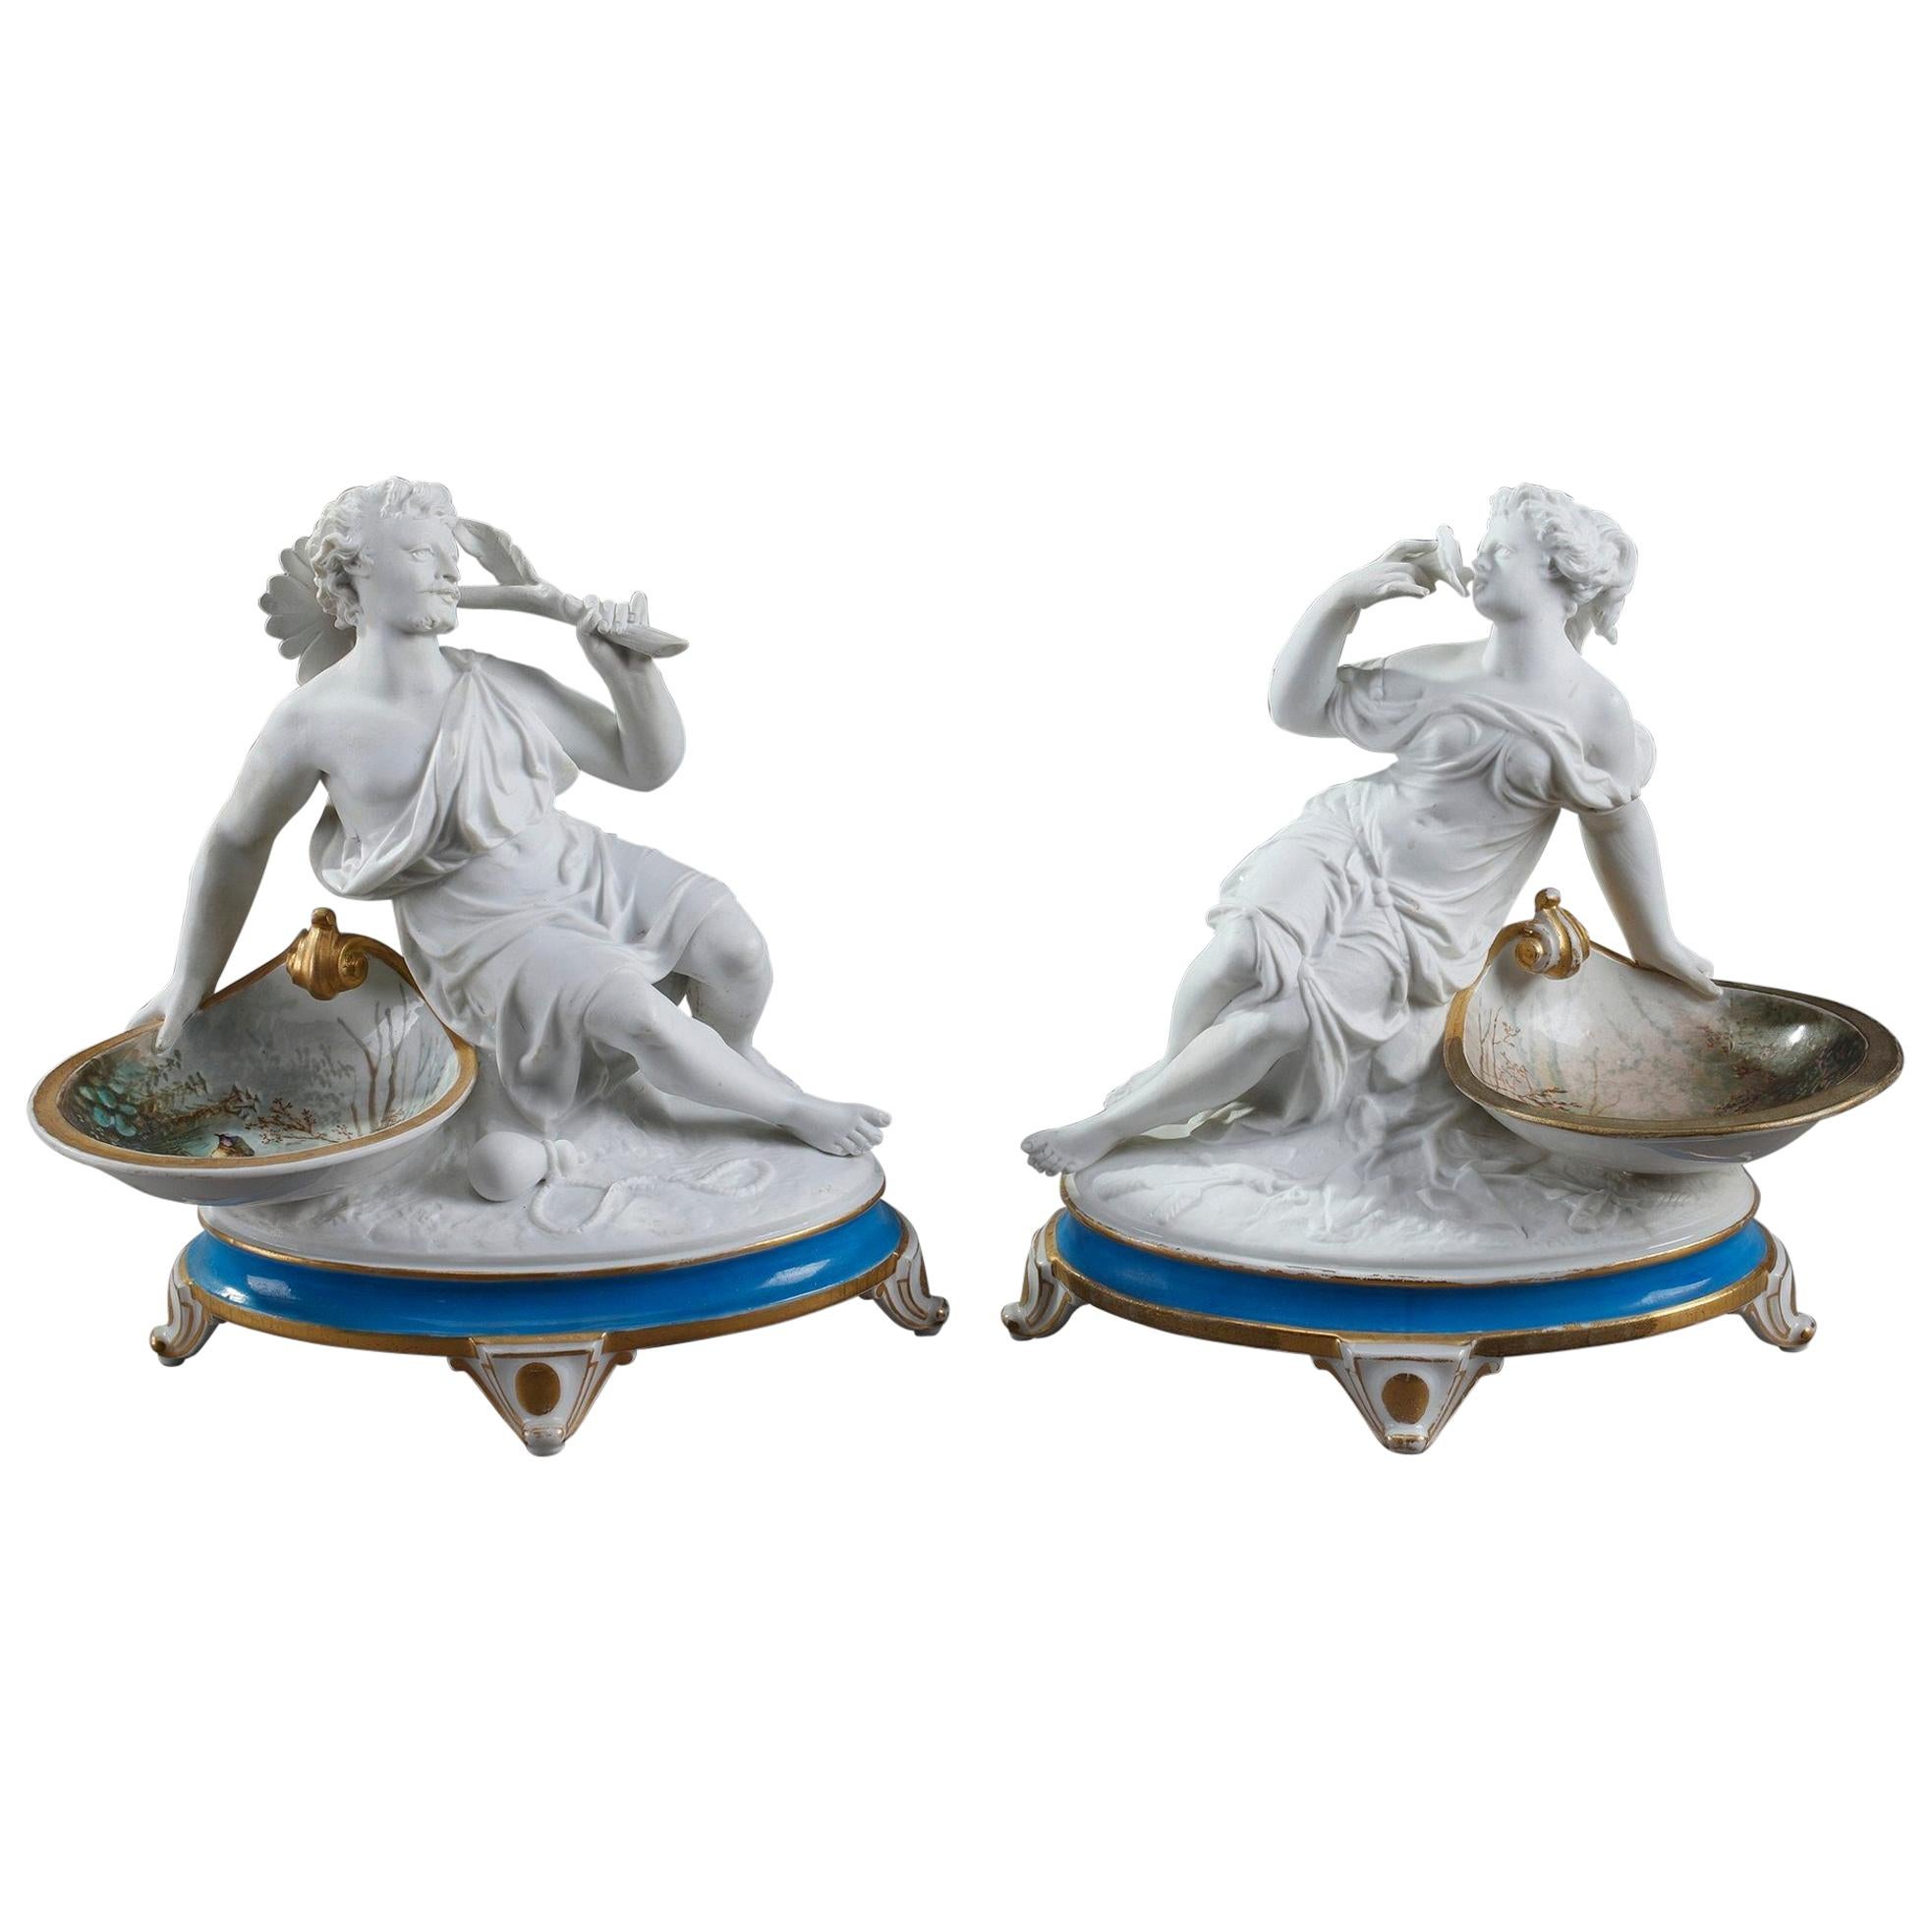 Porcelain Ring Holders with Bisque Figurines and Birds Decoration